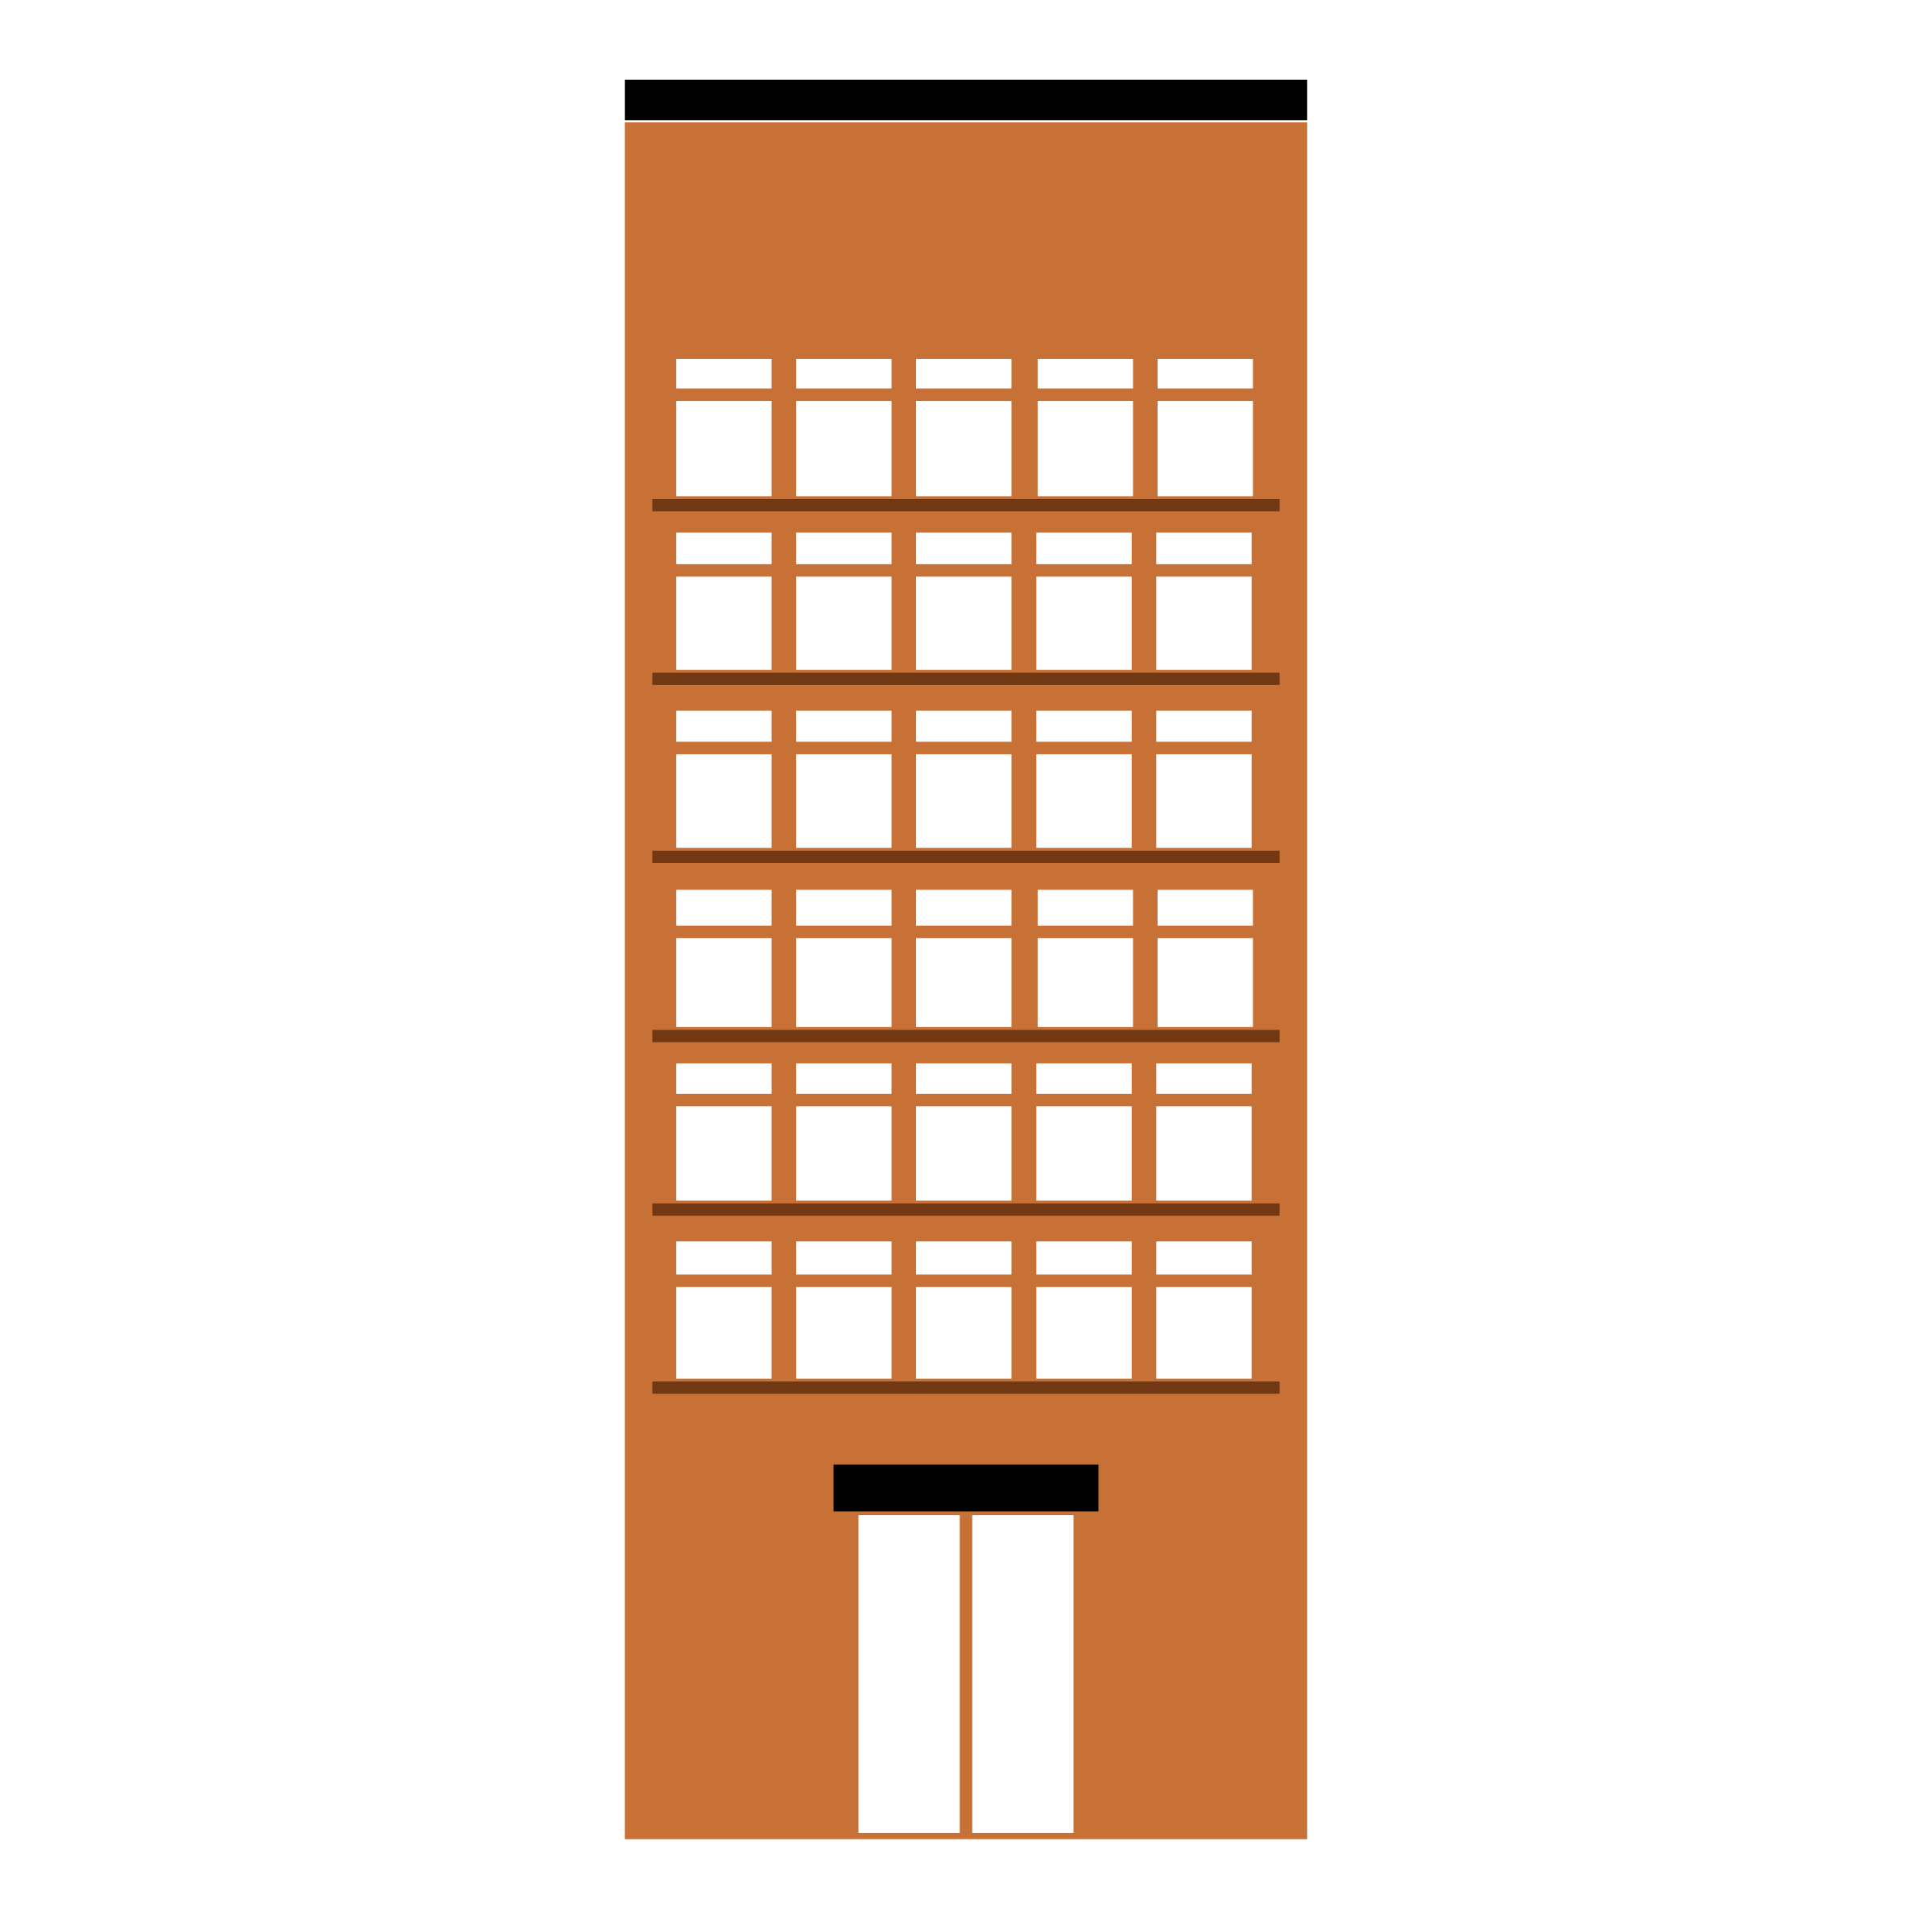 Big Image (Png) - Tall Building, Transparent background PNG HD thumbnail